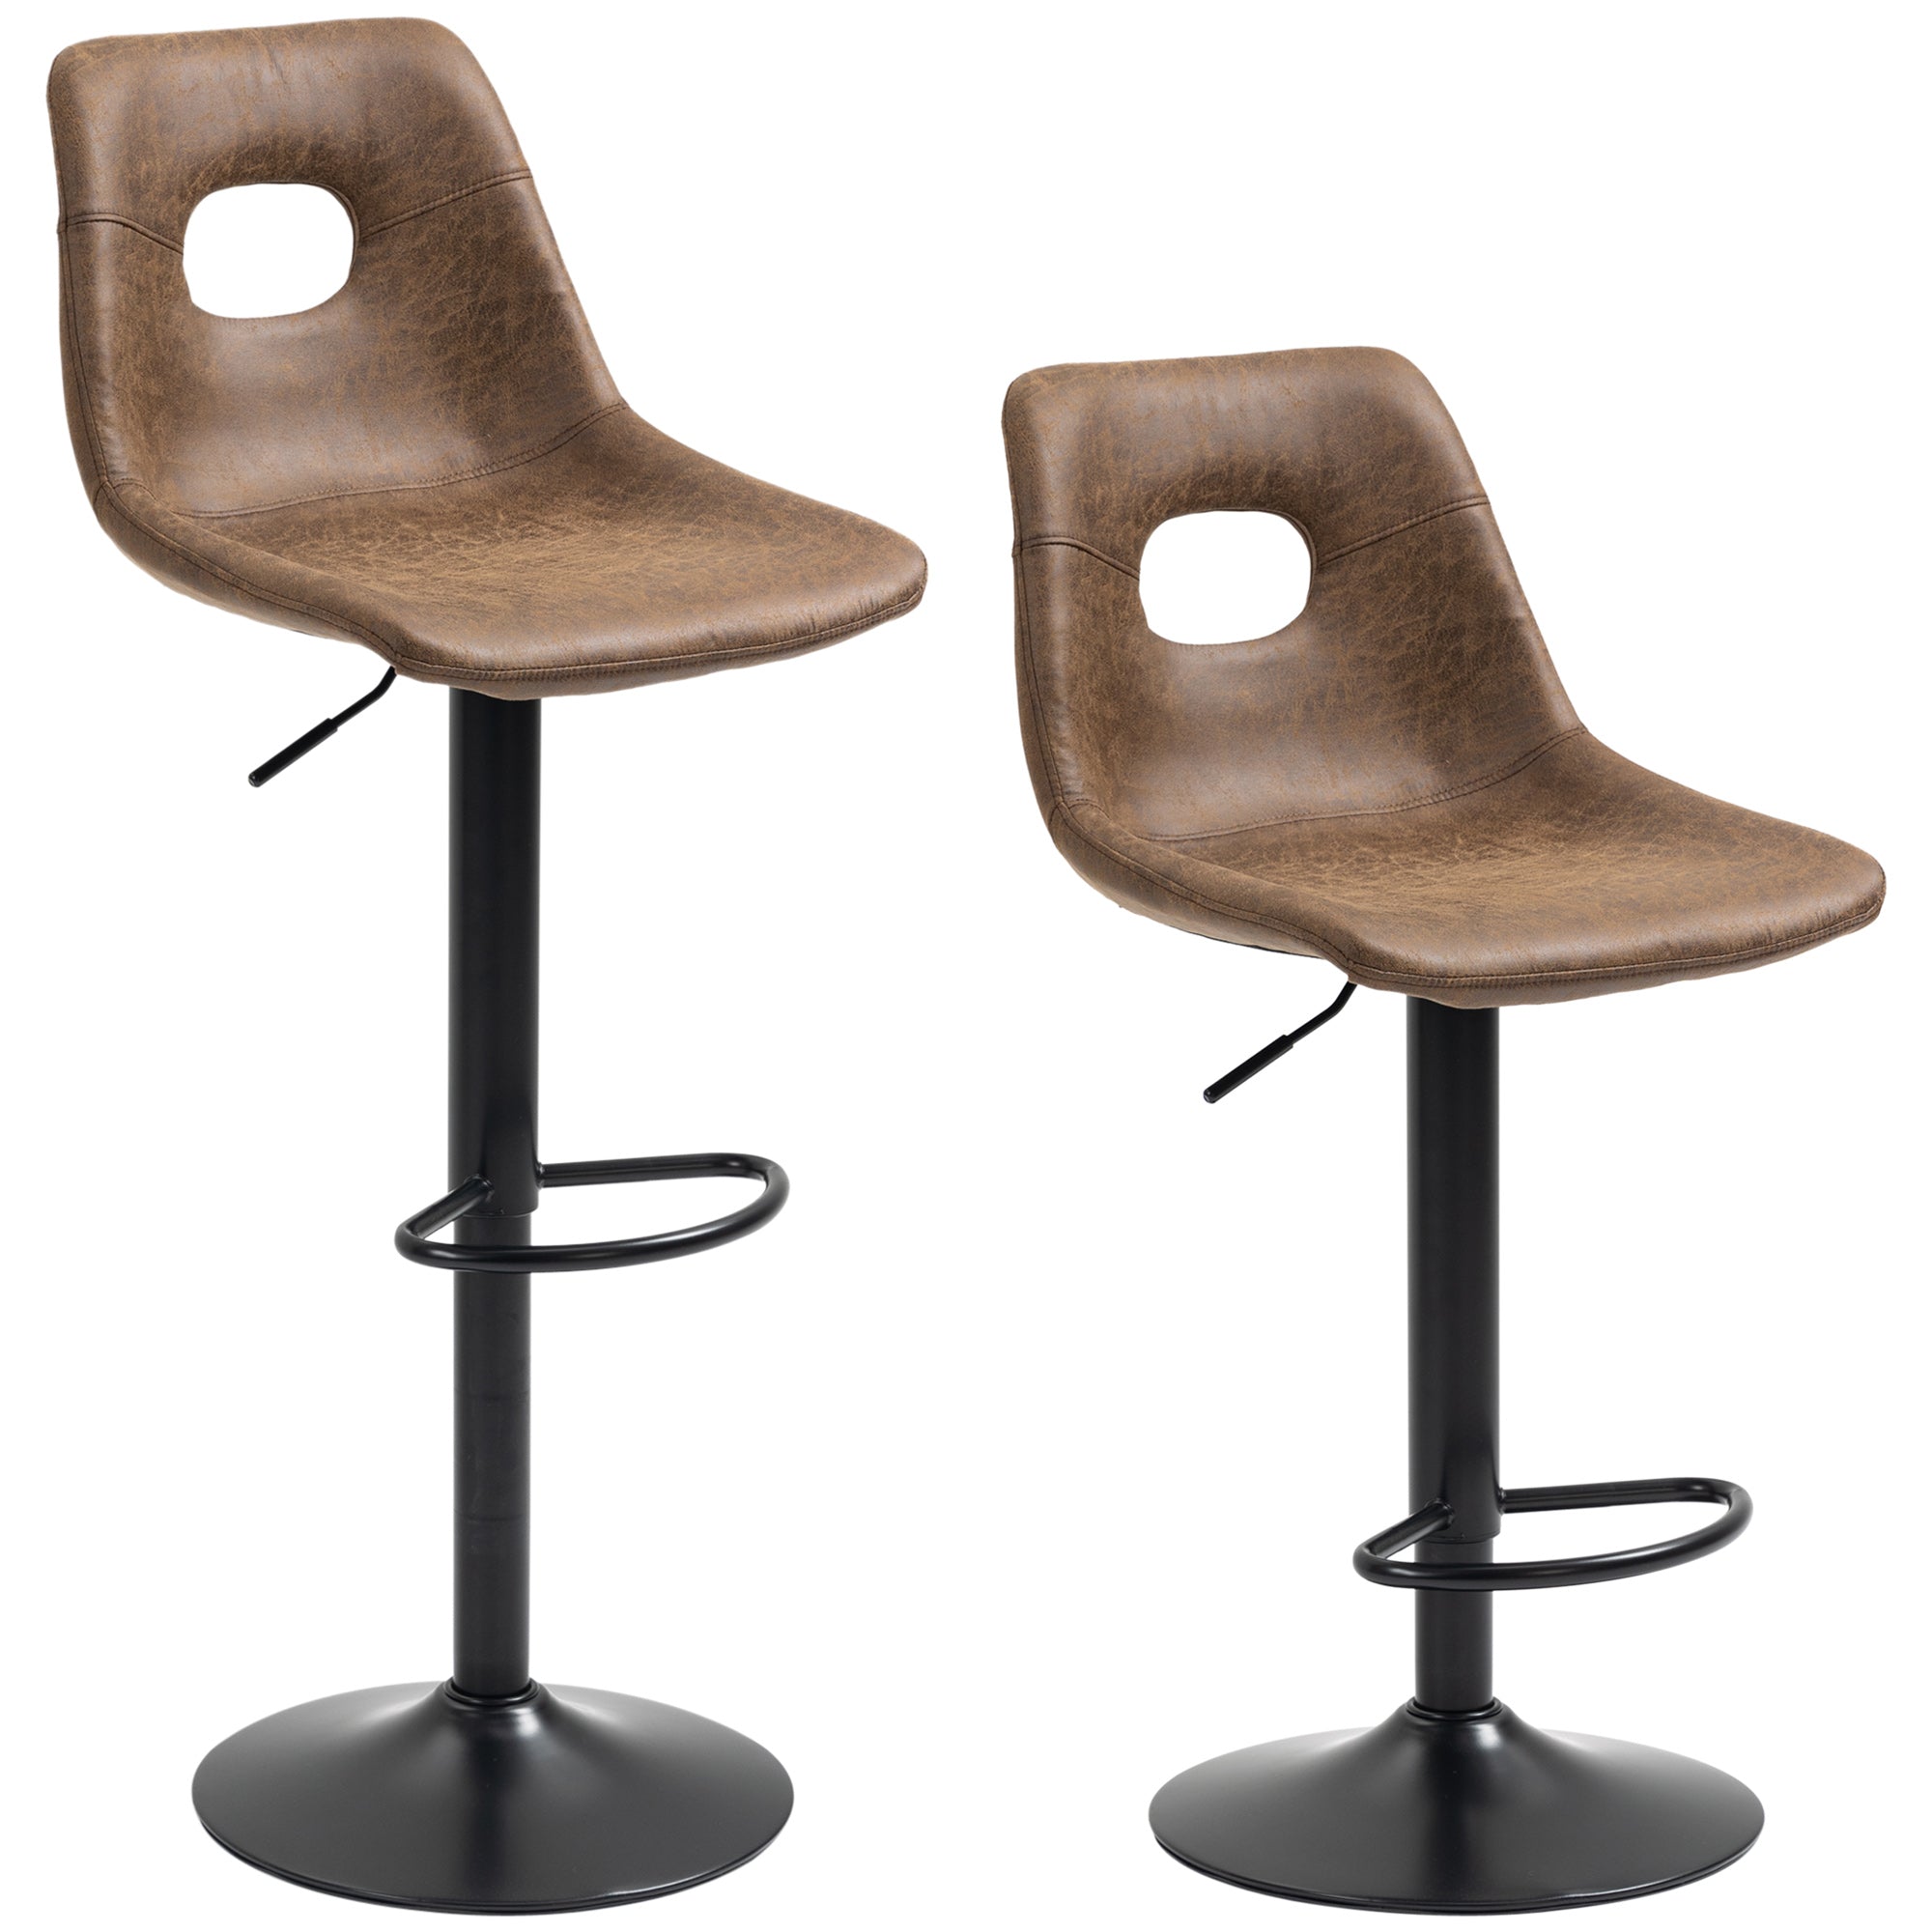 Set of 2 Bar stools With Backs,retro-look , faux leather, Adjustable Breakfast Dining Stools with Backrest, Footrest, Brown  AOSOM   